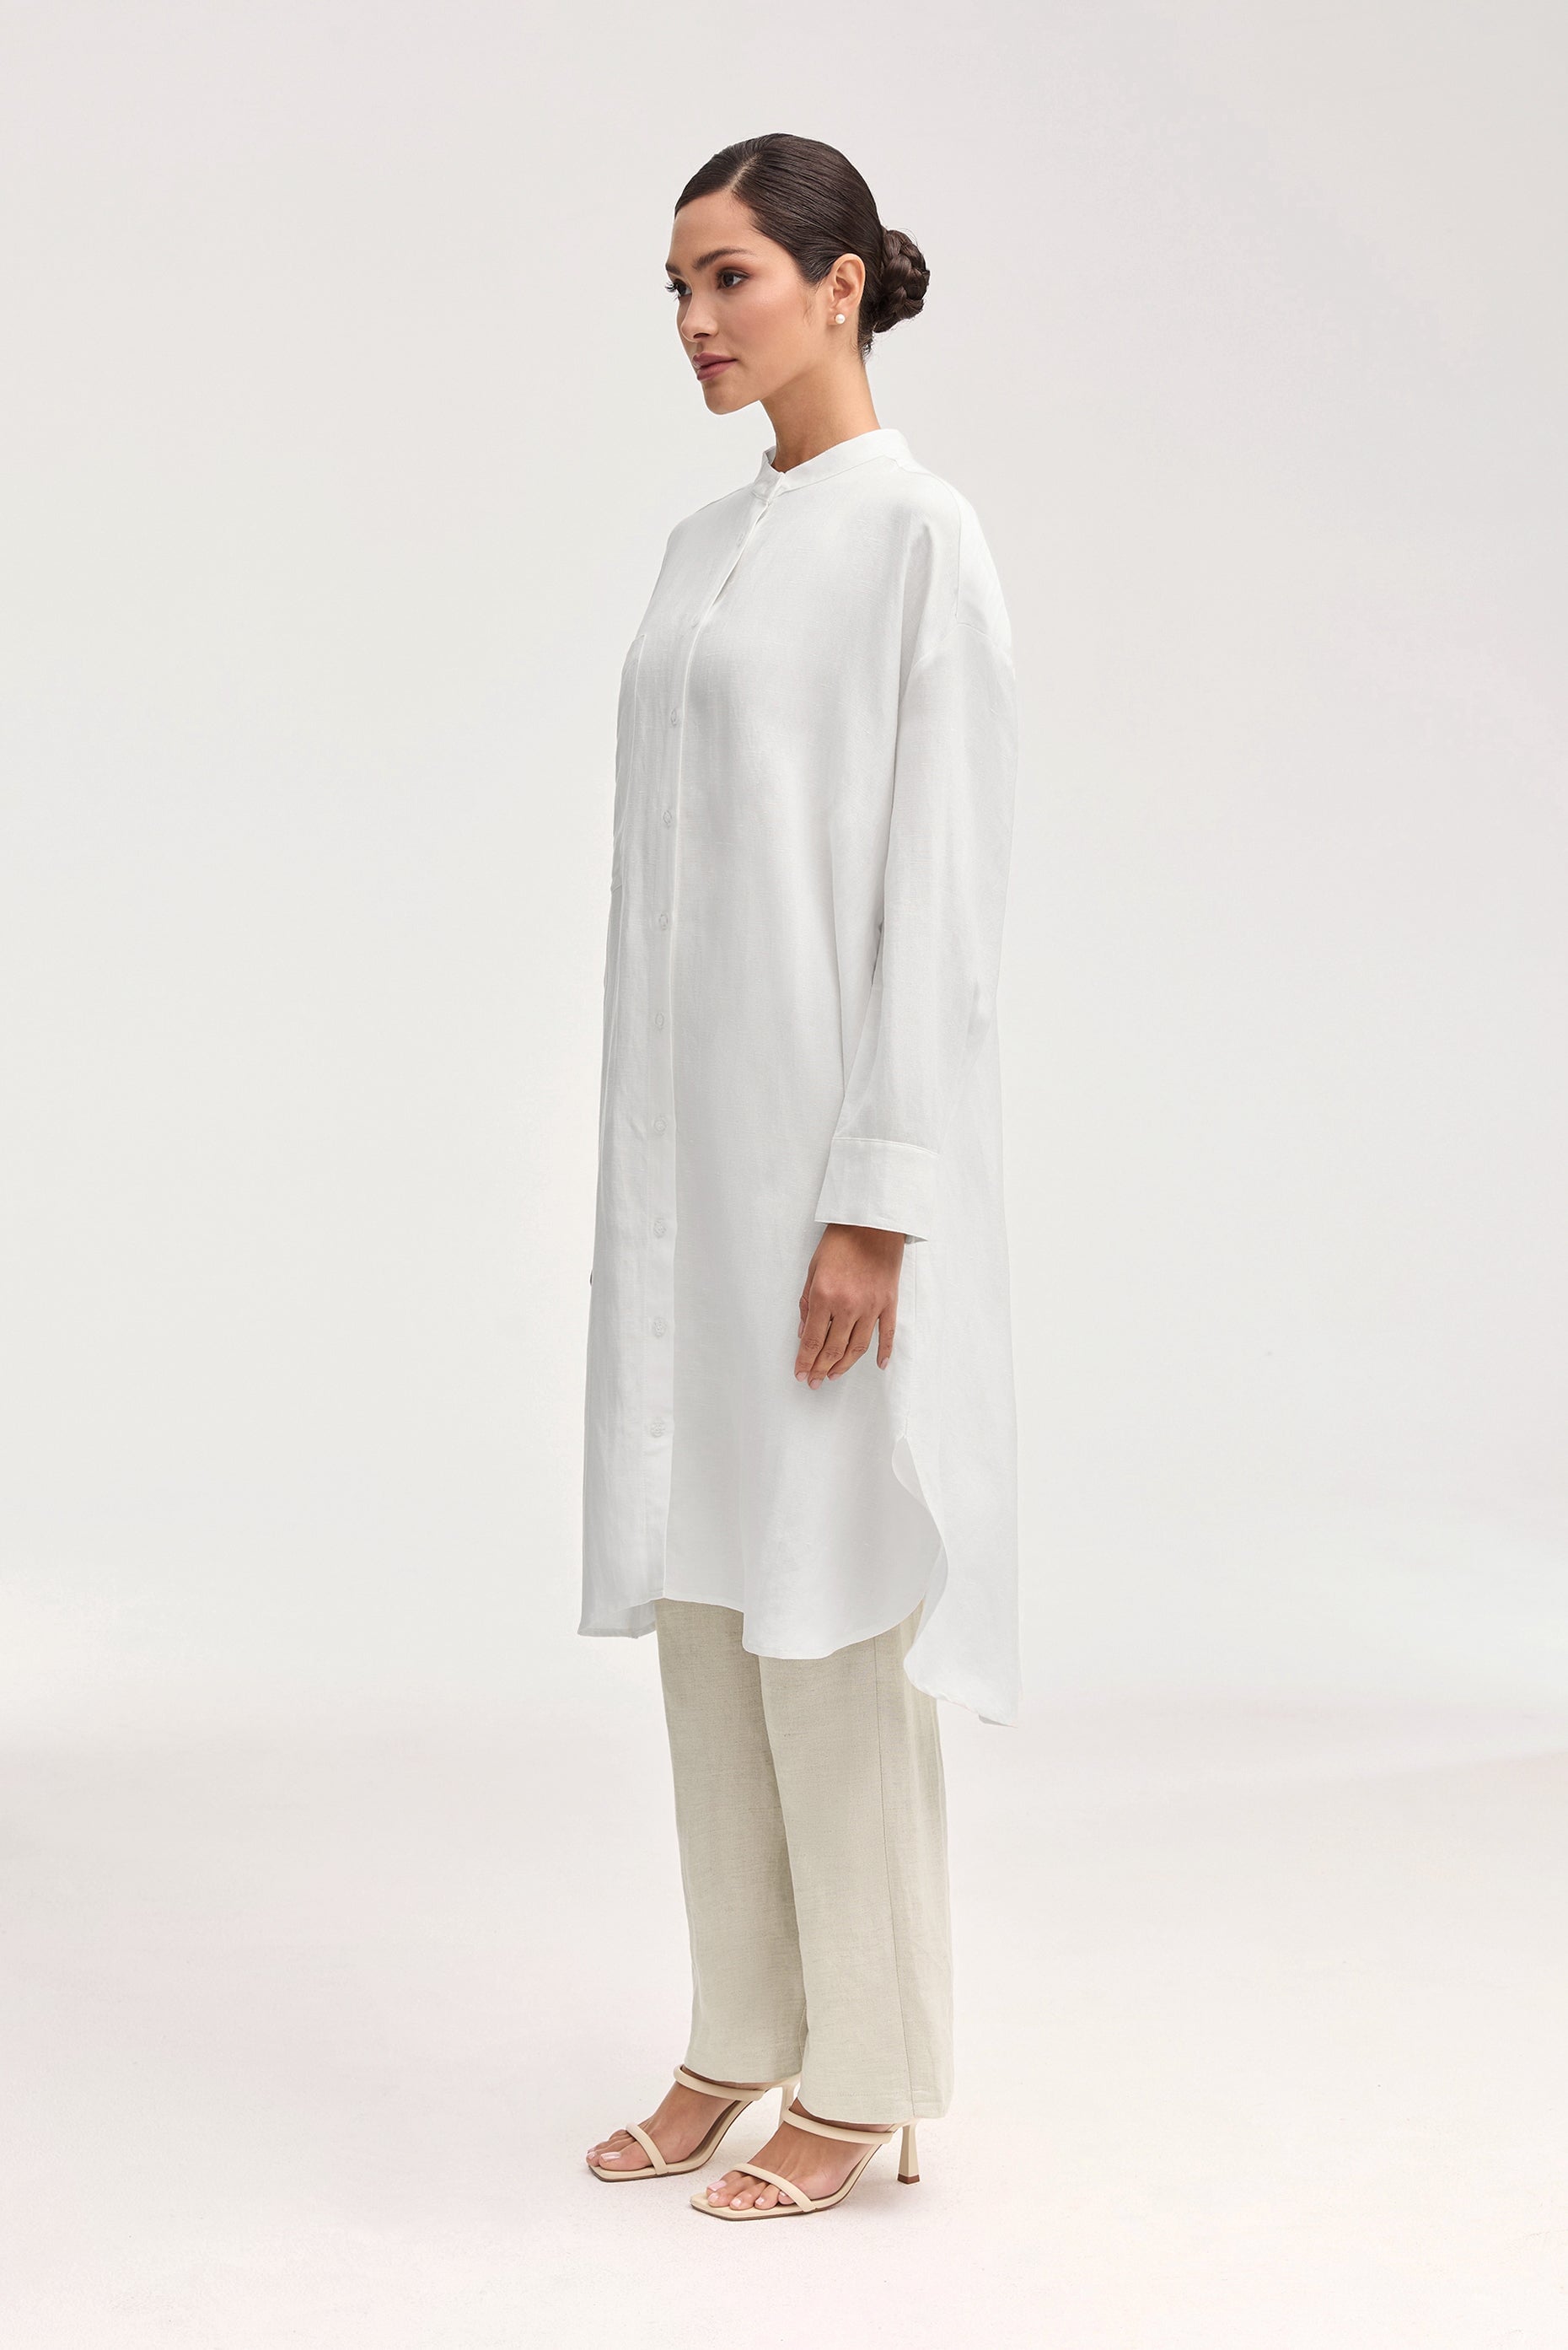 Linen Longline Button Down Cover Up Top - White Clothing Veiled 